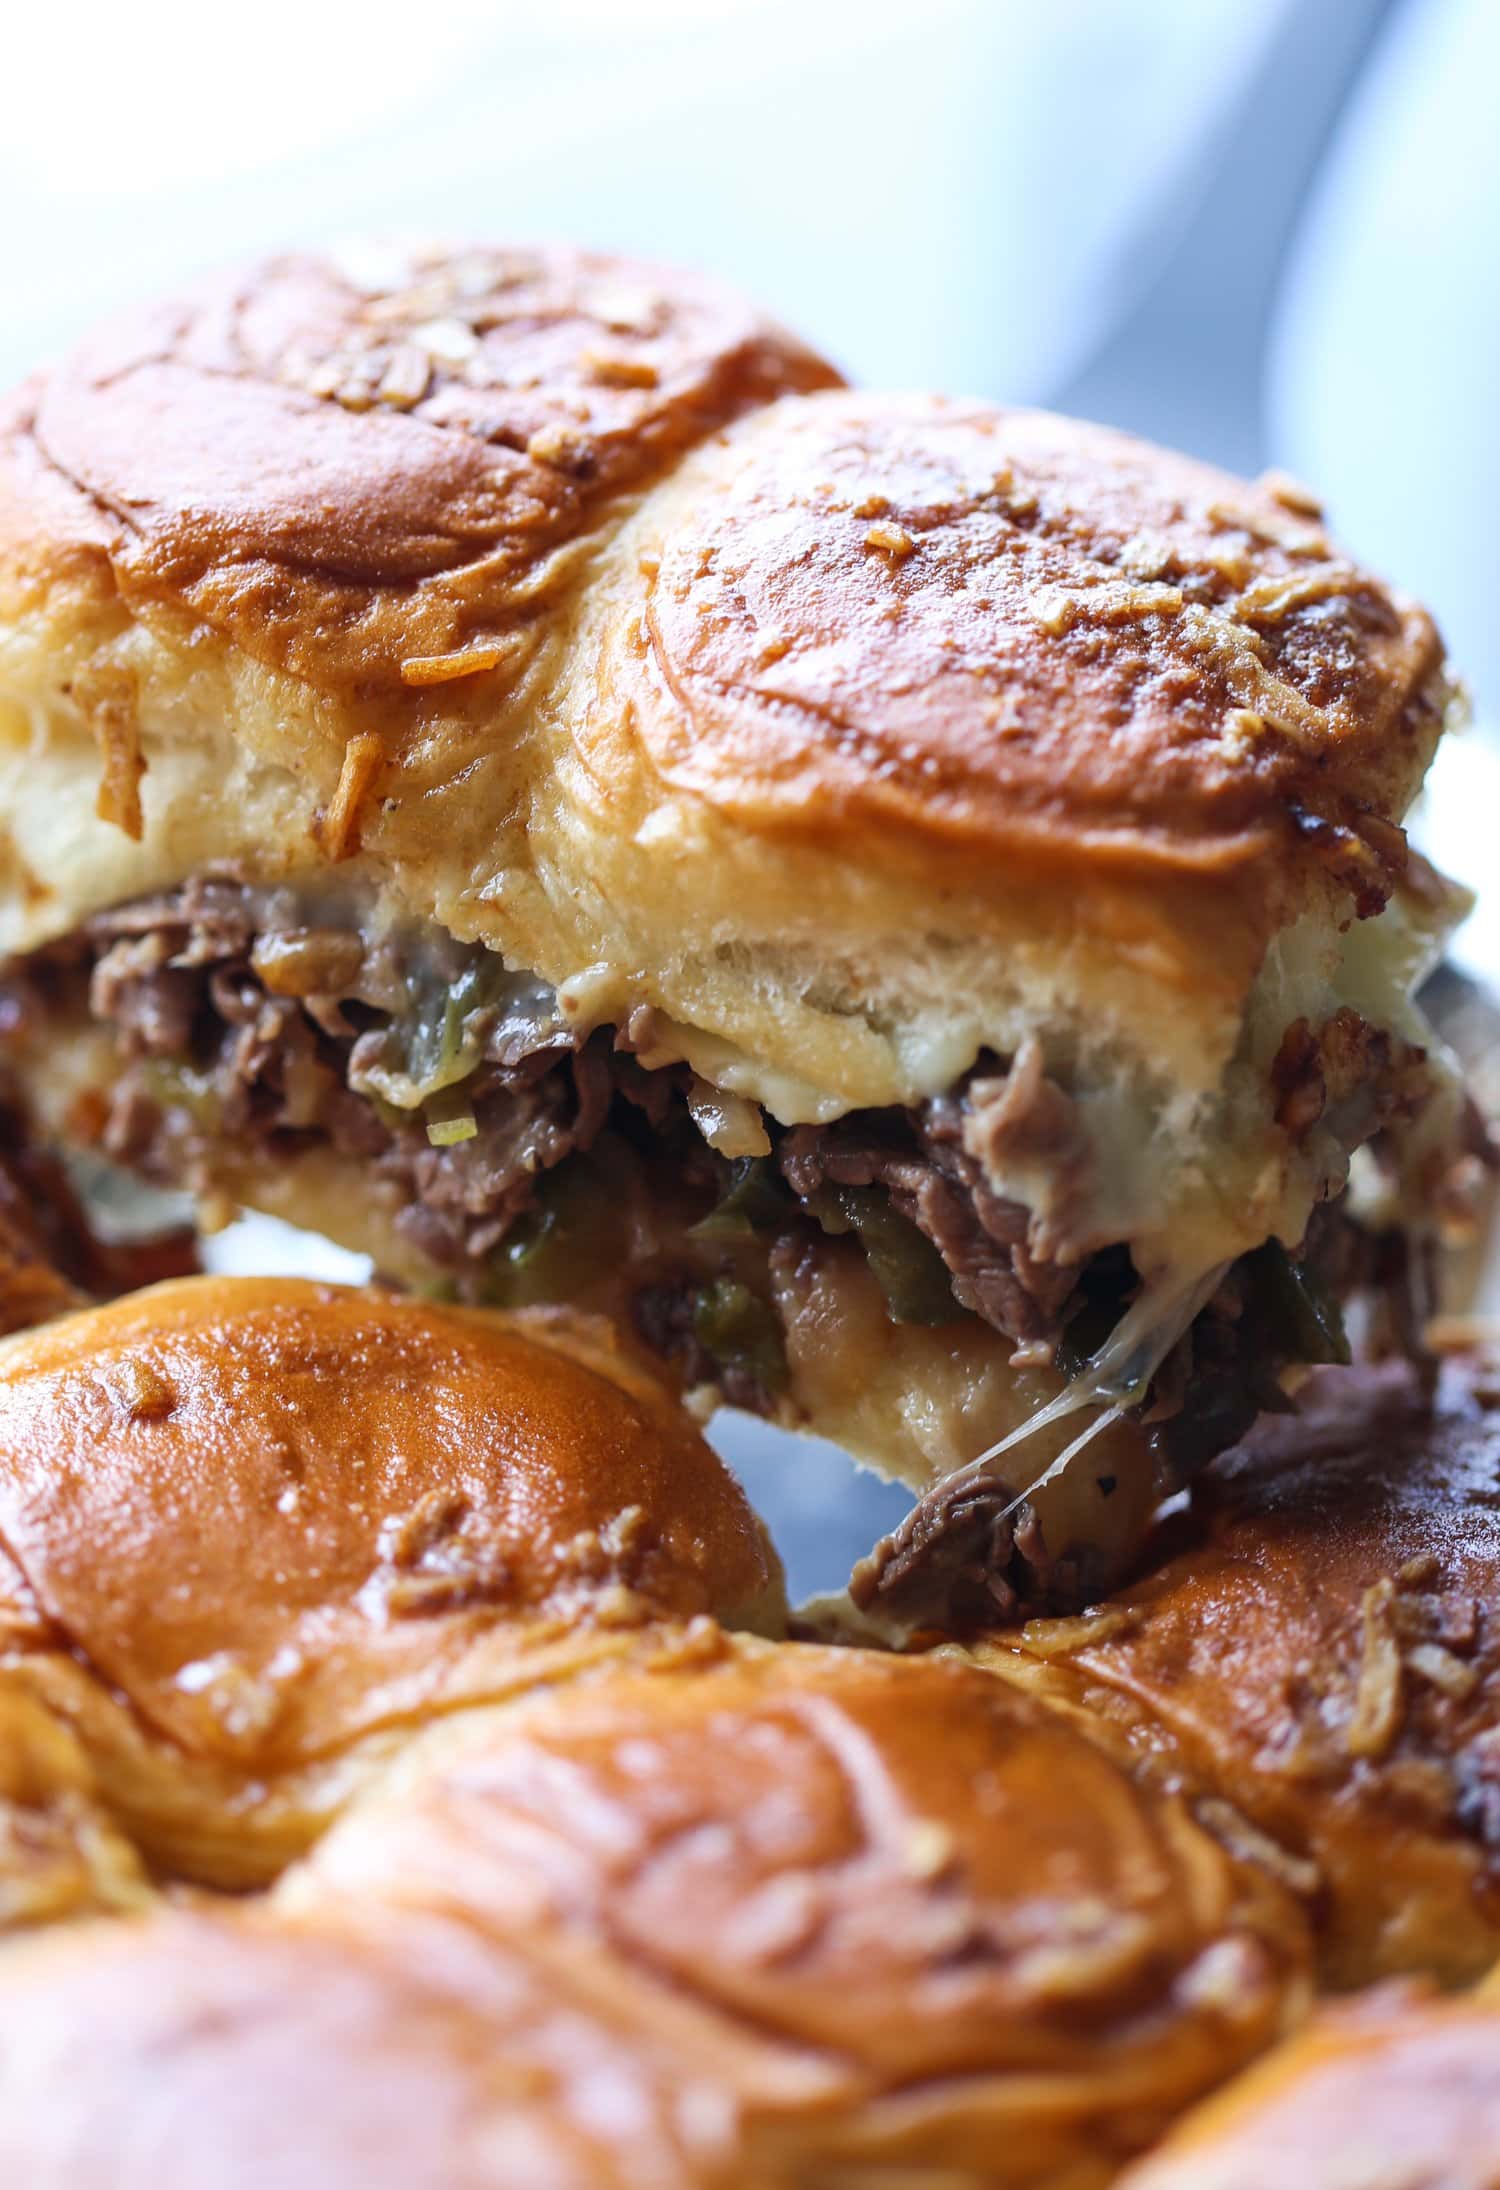 Two Philly cheesesteak sliders are scooped from the pan.